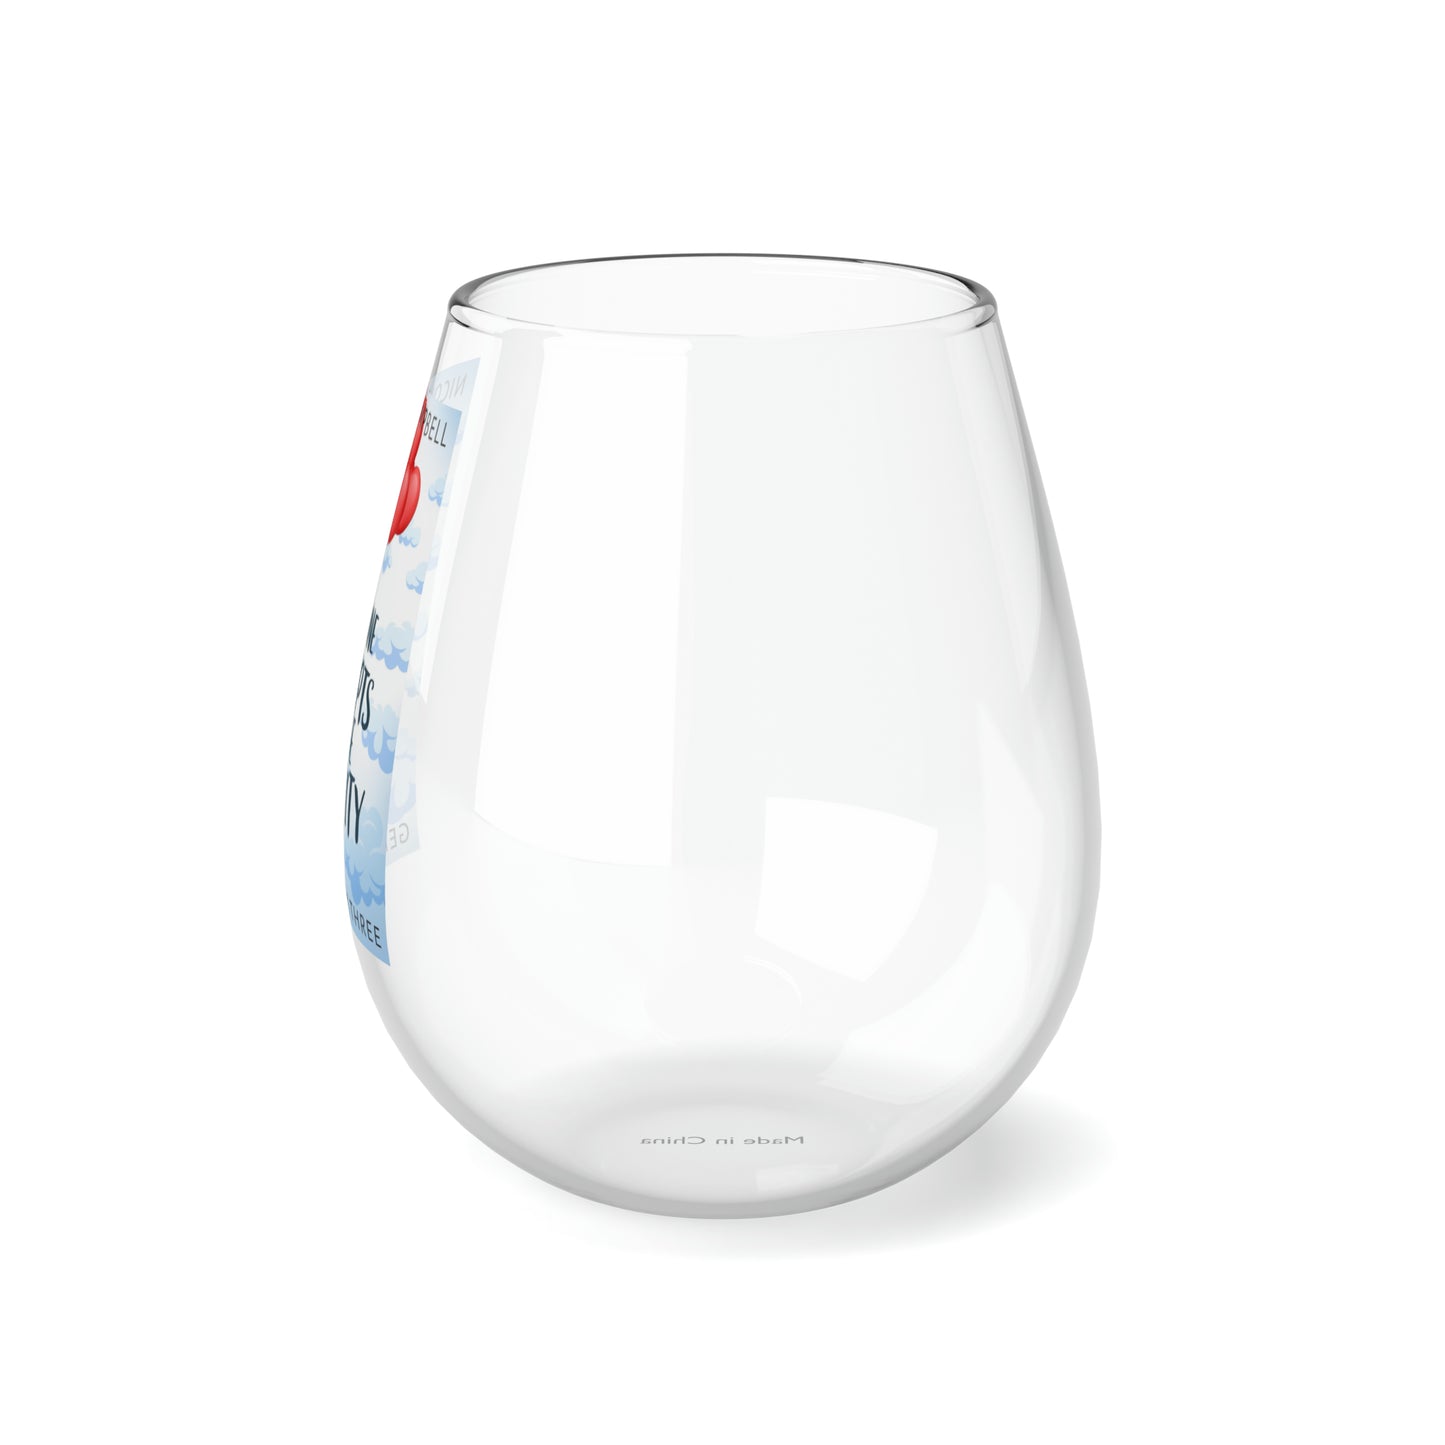 How One Attempts to Chase Gravity - Stemless Wine Glass, 11.75oz